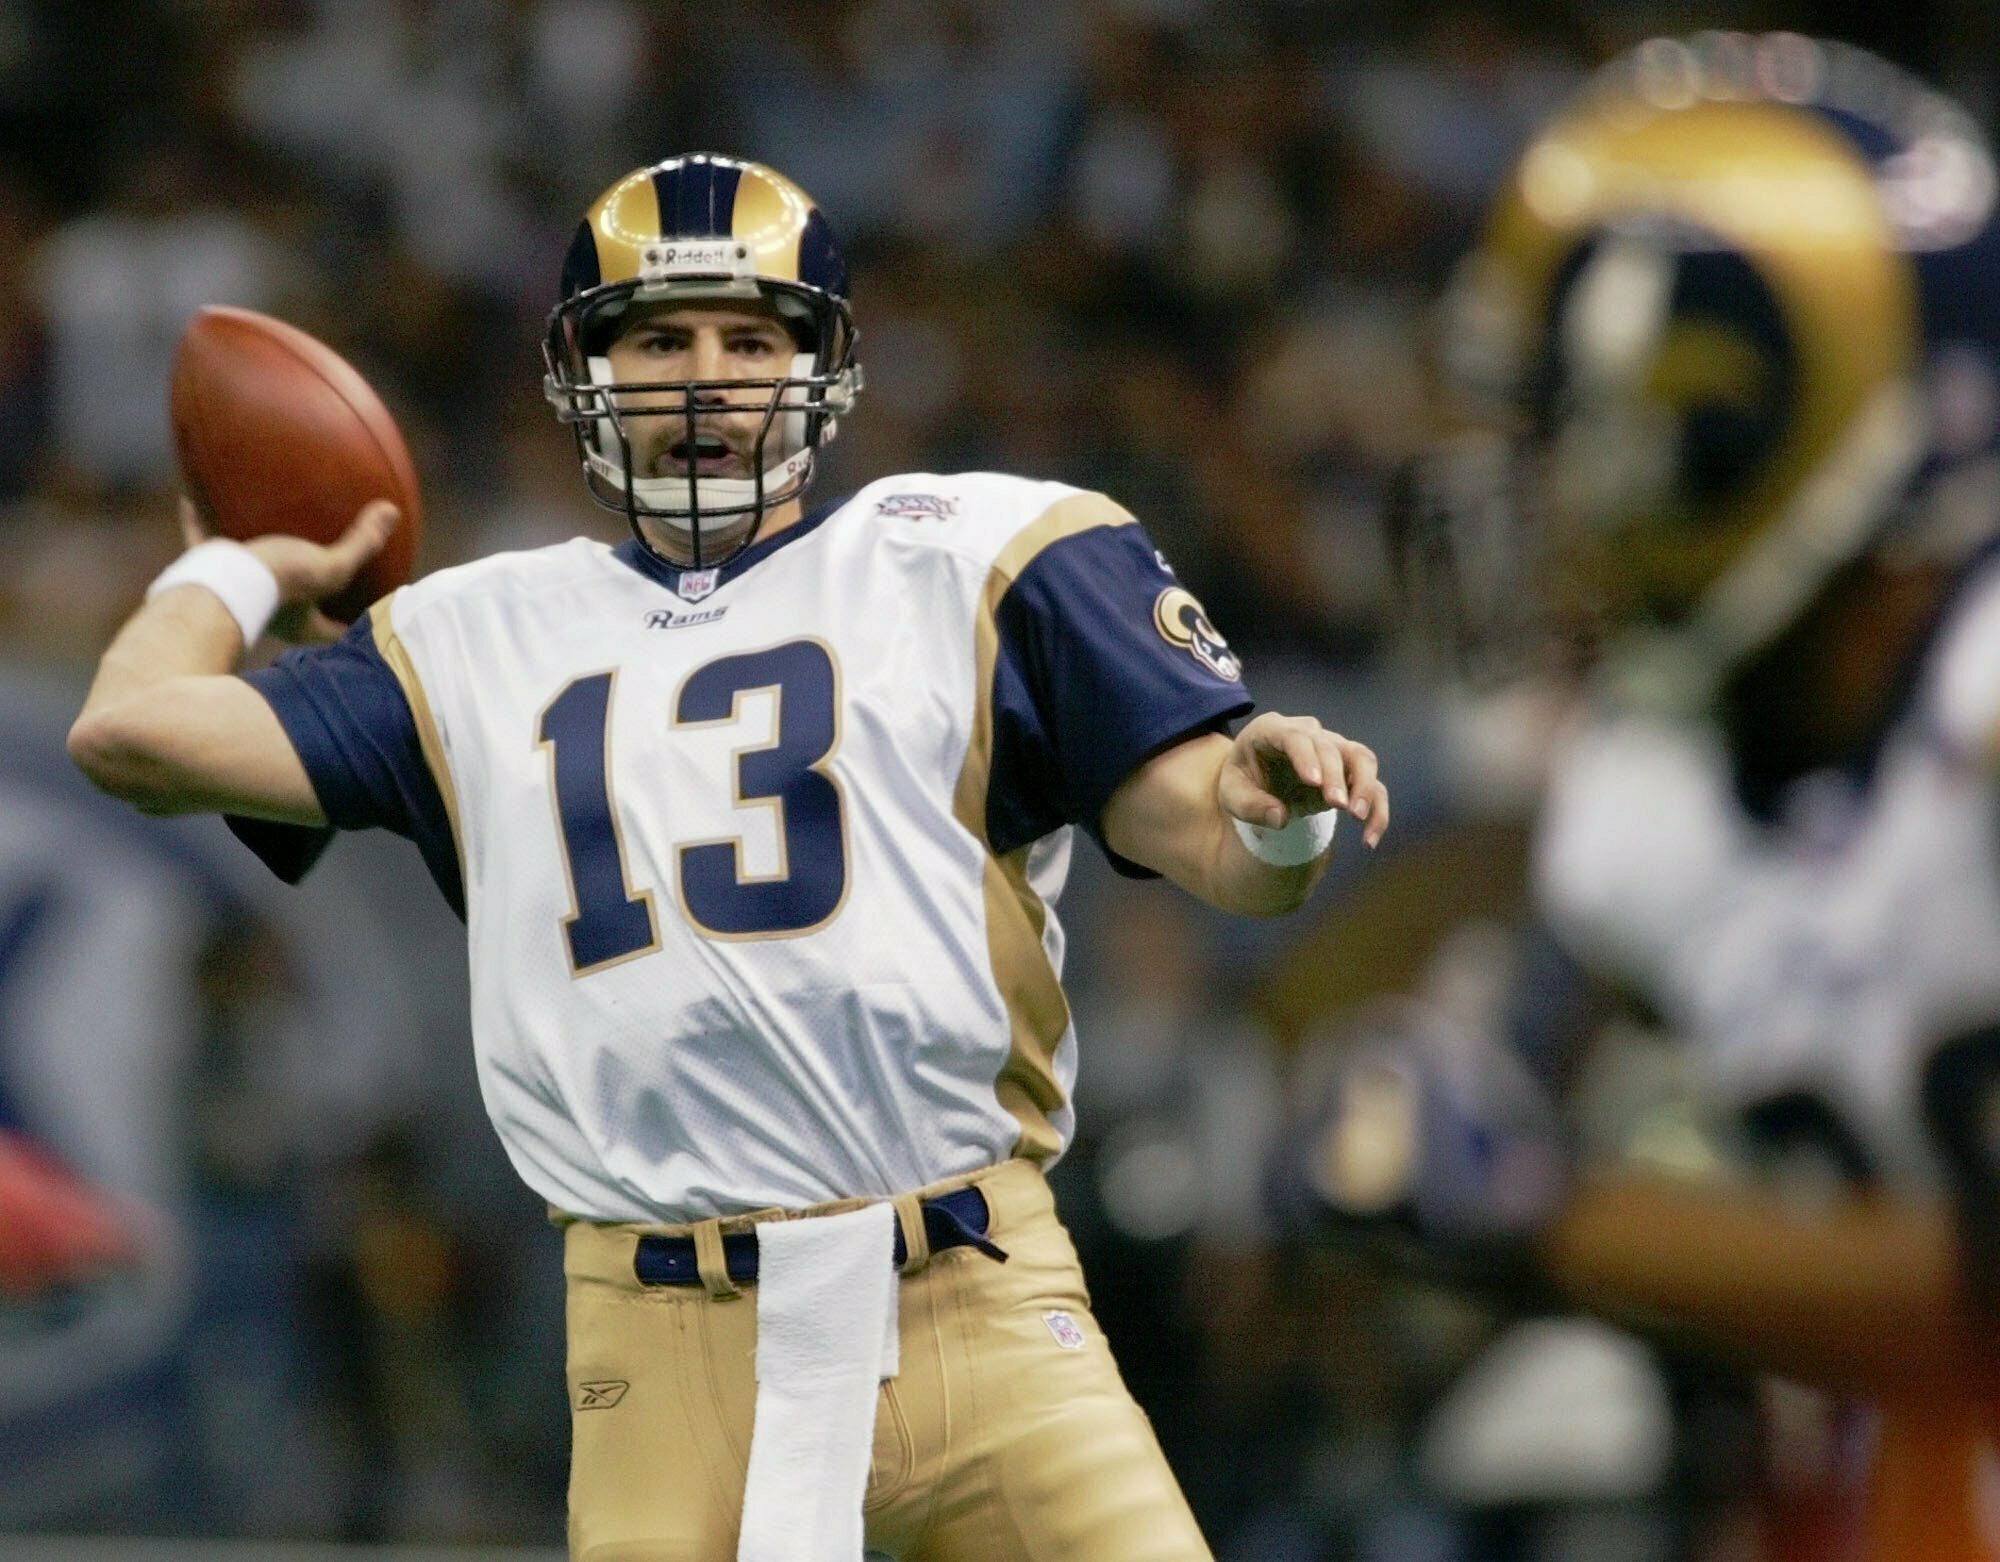 Today’s wide-open offenses emanate from Rams’ Greatest Show